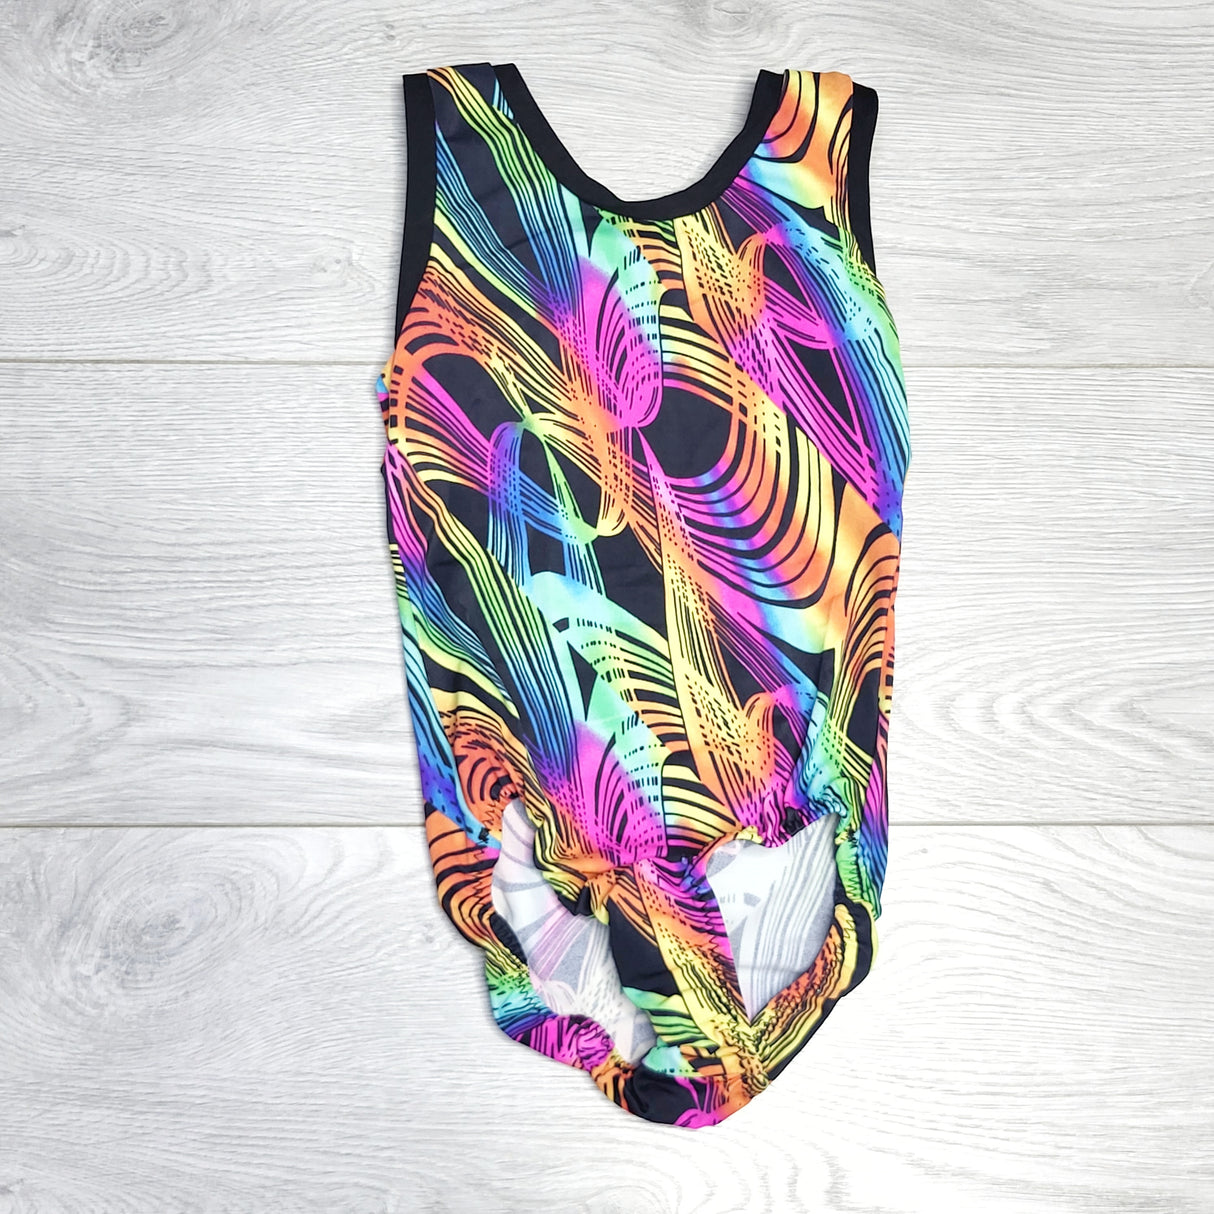 HWIL1 - Abstract patterned gymnastics suit. Approx size 5/6